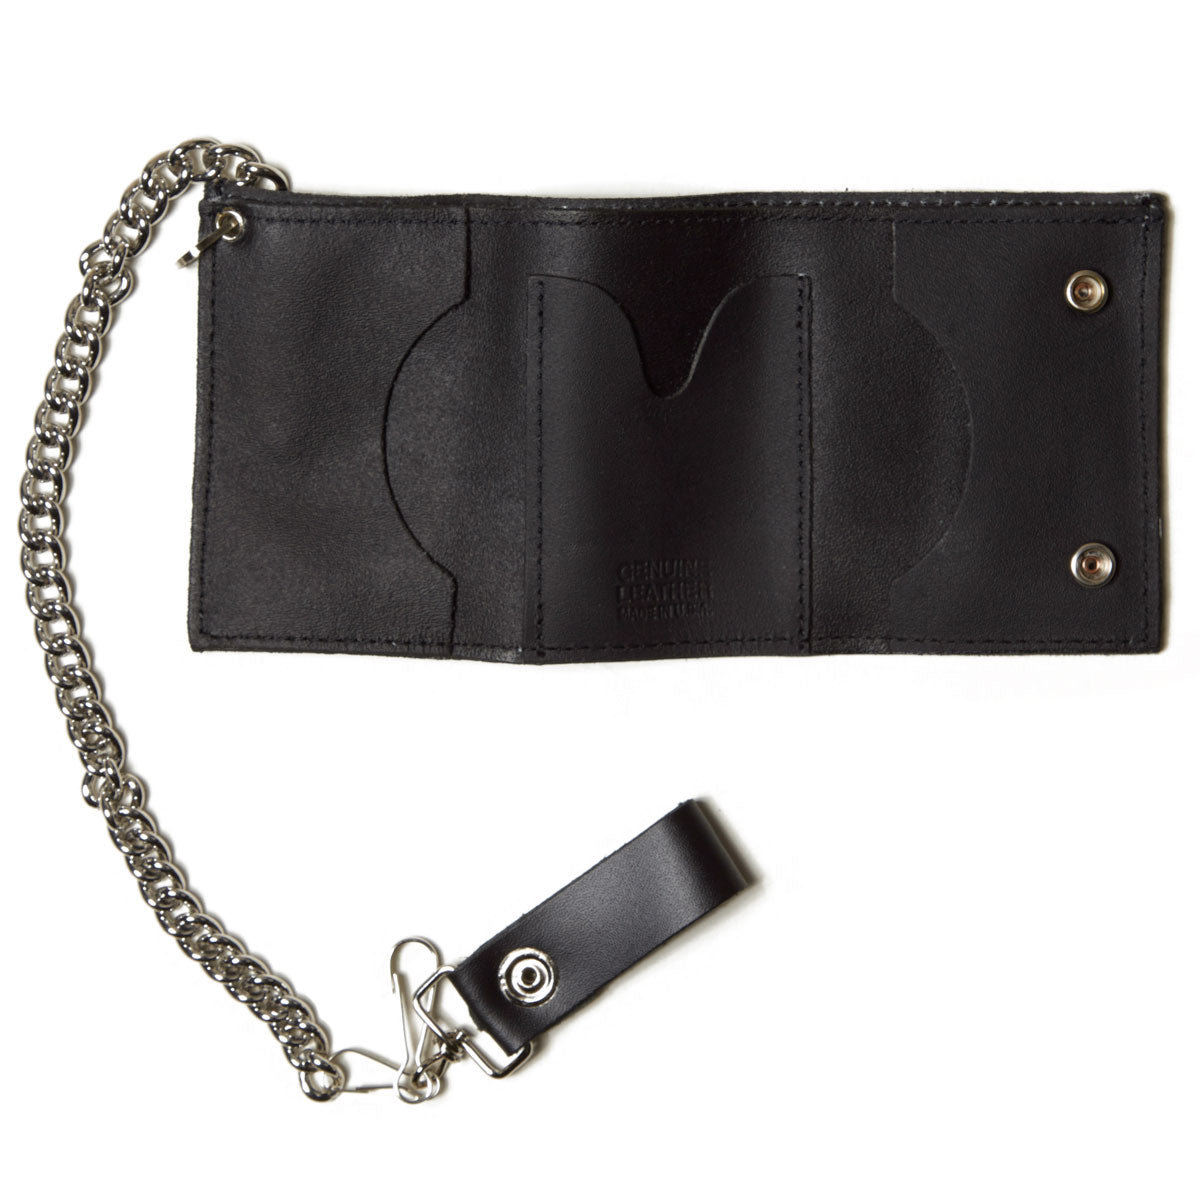 Dogtown Small Trifold Leather Chain Wallet - Black image 2